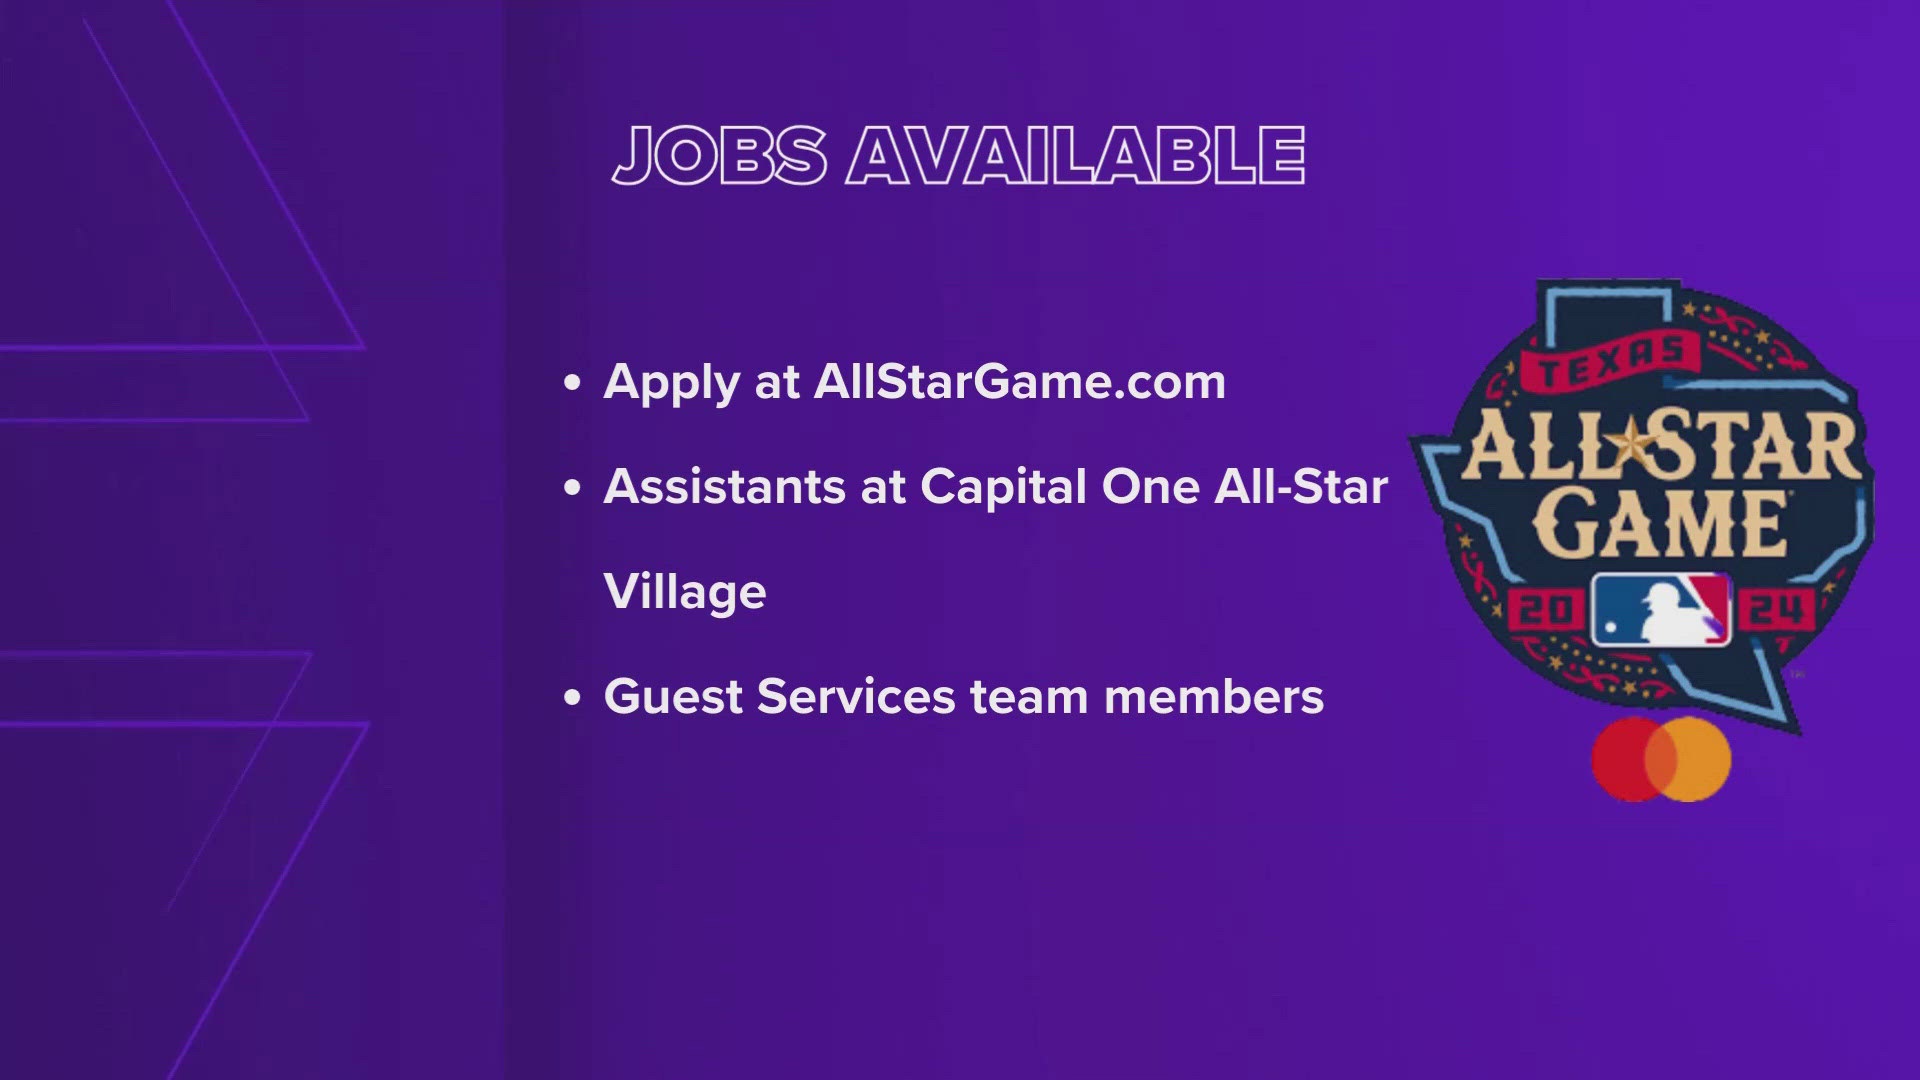 Anyone 18 years old or older can apply through May 15 to be part of the MLB All-Star Experience Team.